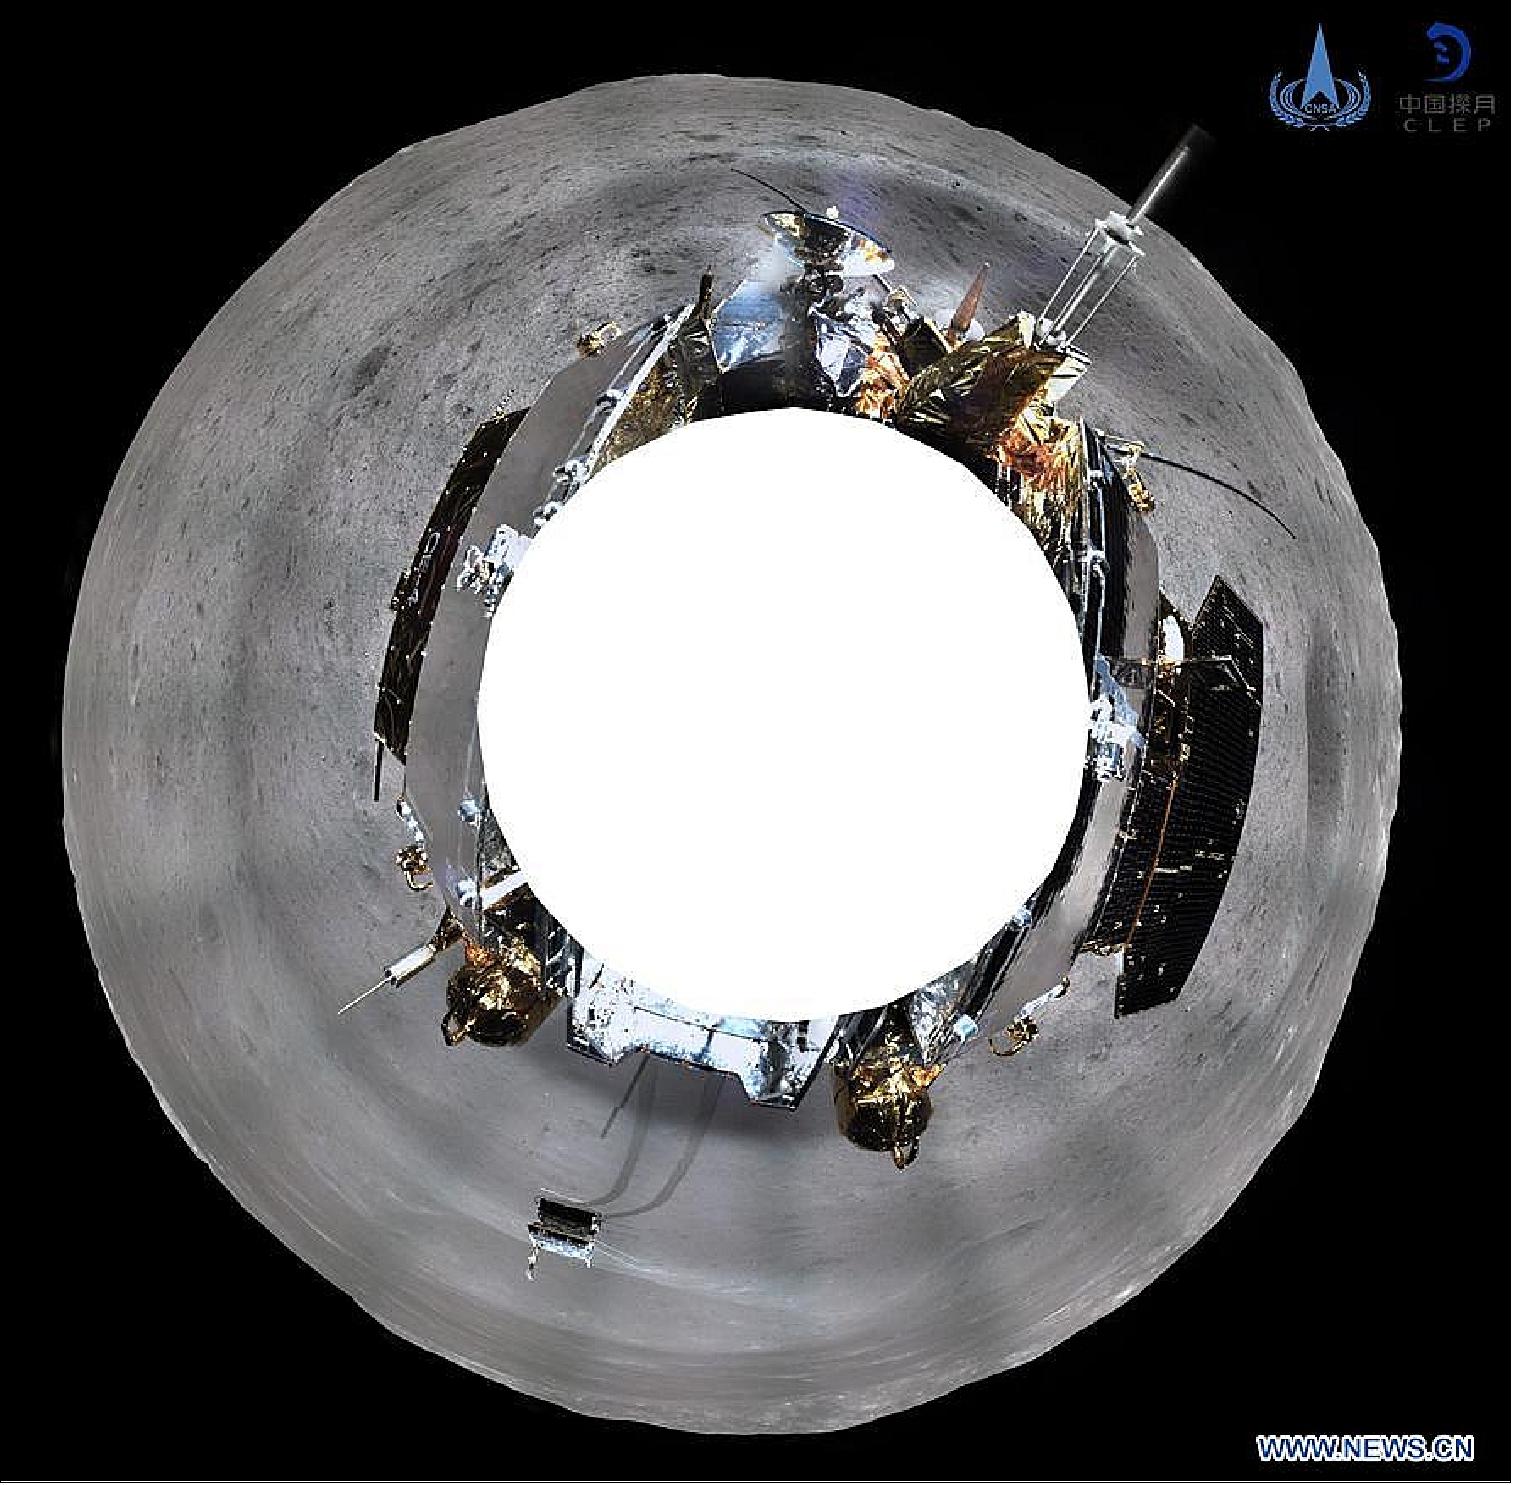 Figure 27: China's Chang'e-4 probe took panoramic photos on the lunar surface after it successfully made the first ever soft-landing on the far side of the moon (image credit: CNSA, Xinhua)